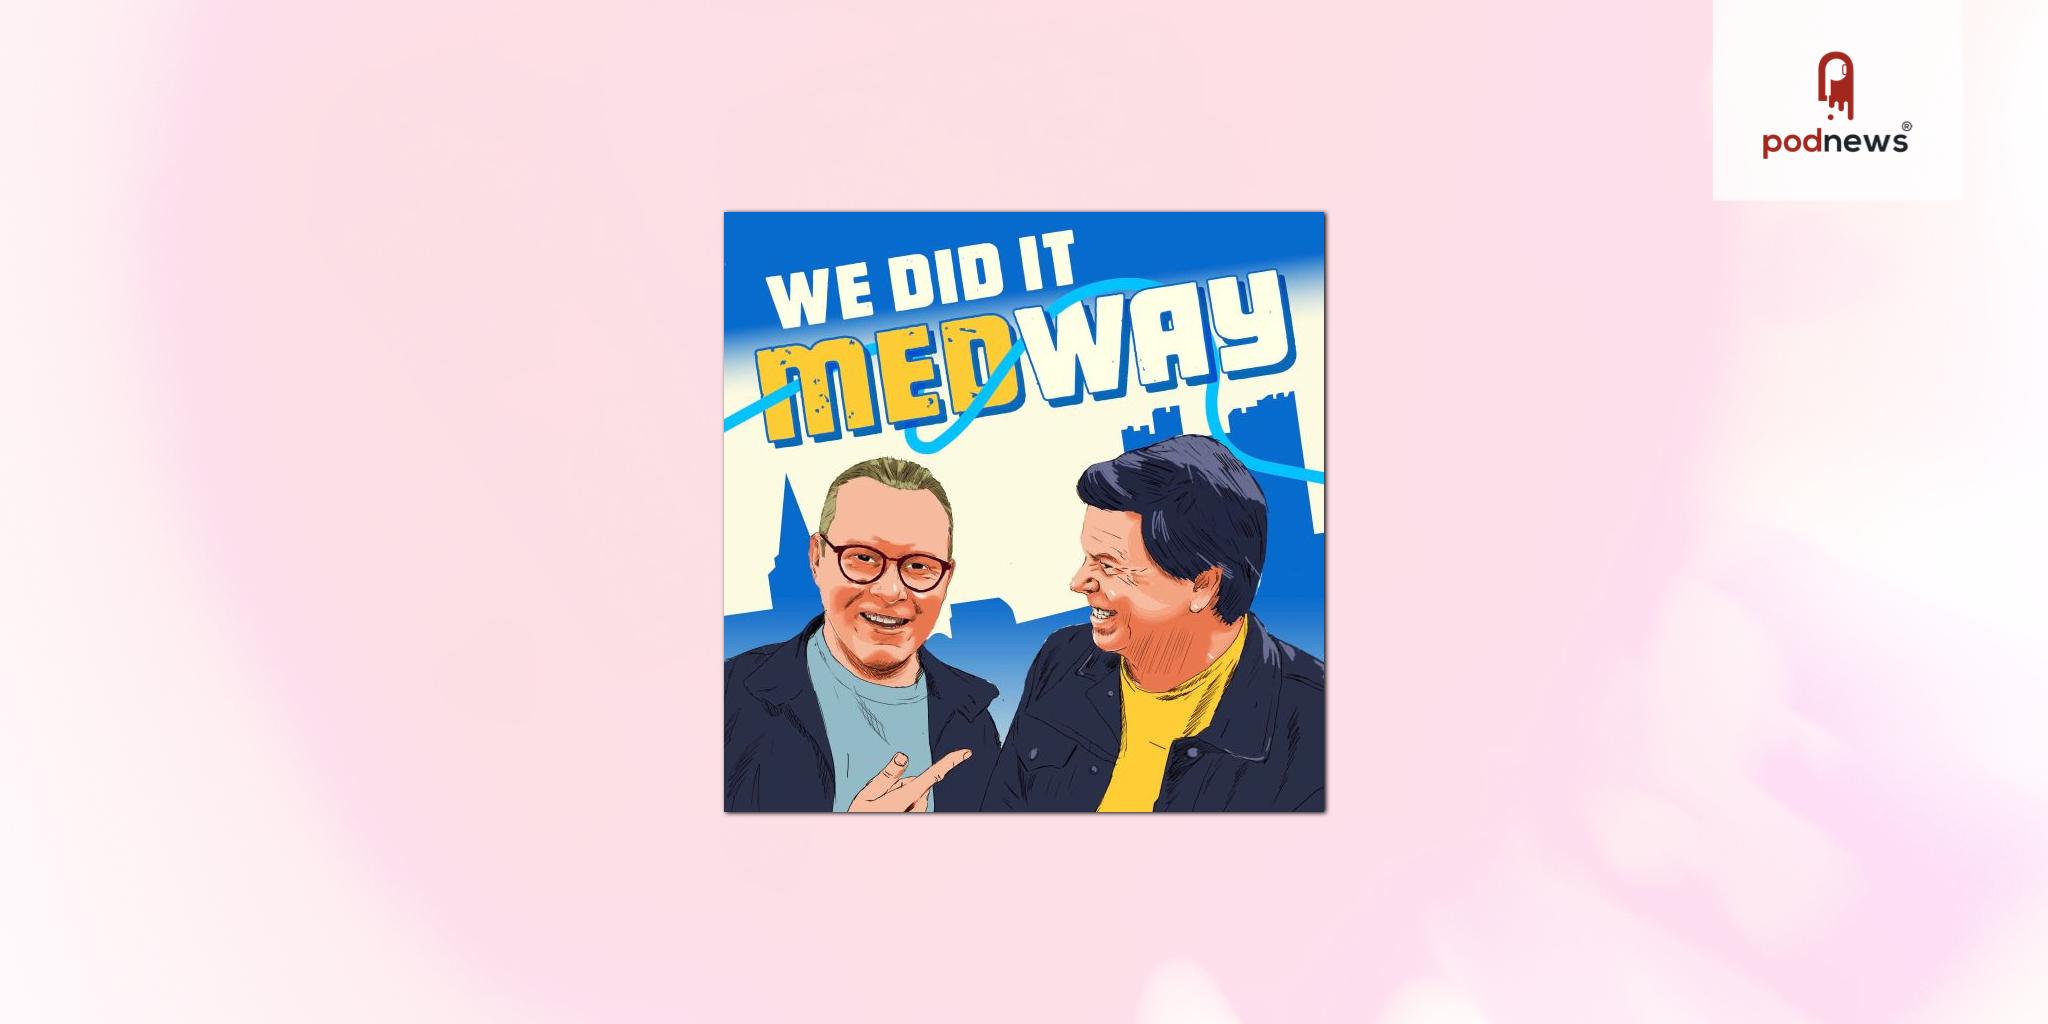 We Did It Medway - the culture, history and character of the Medway towns in England